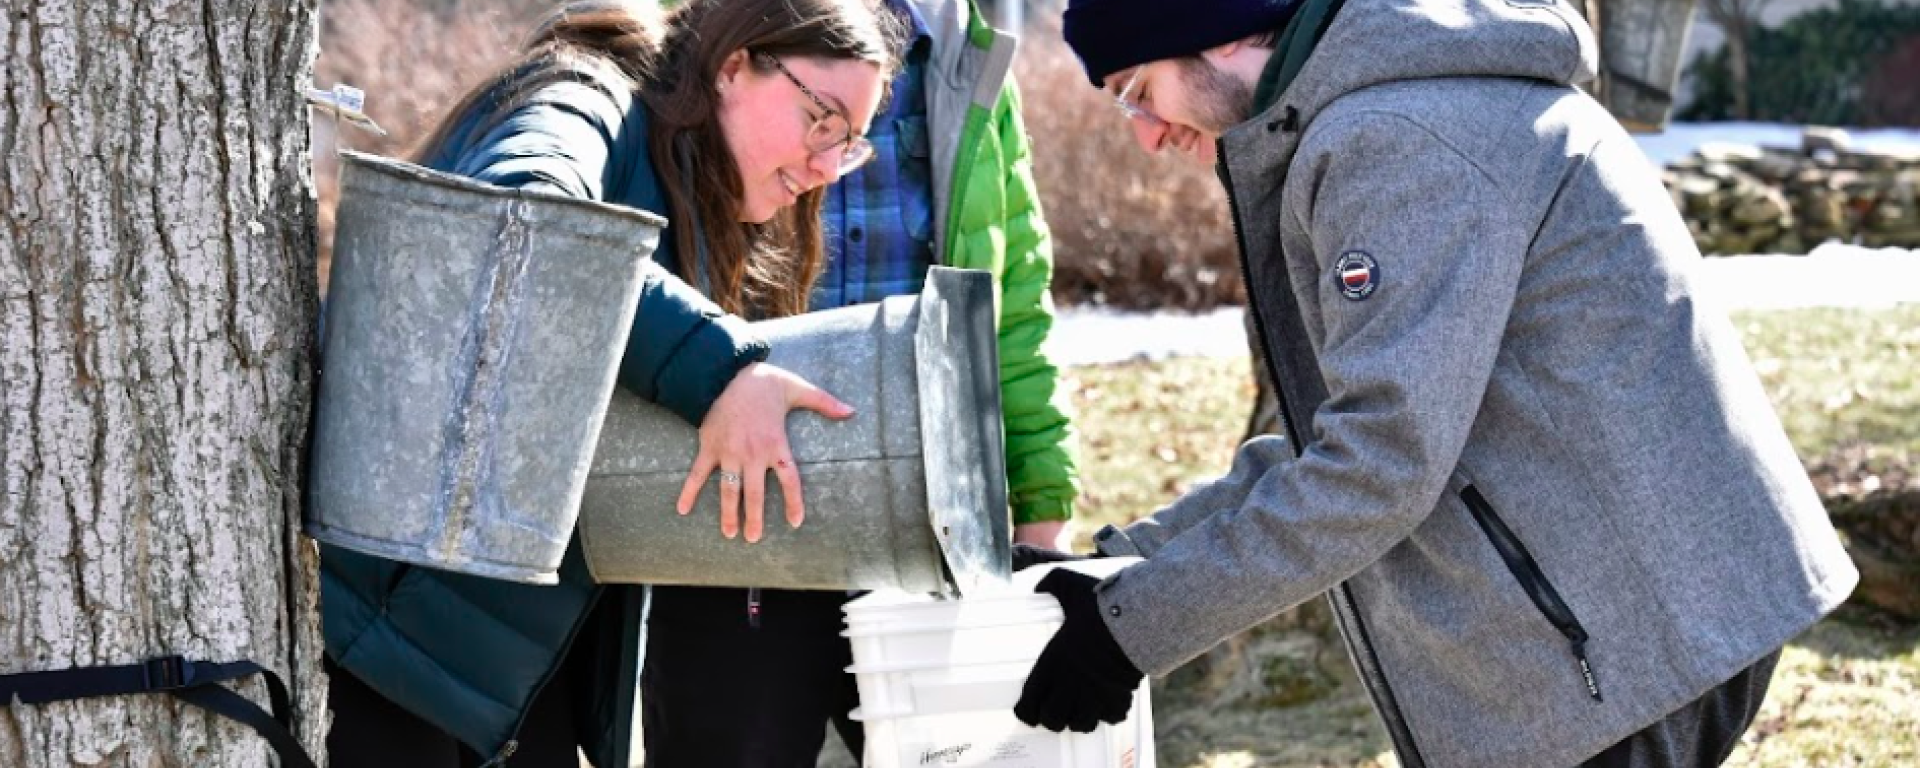 students collecting maple sap on campus